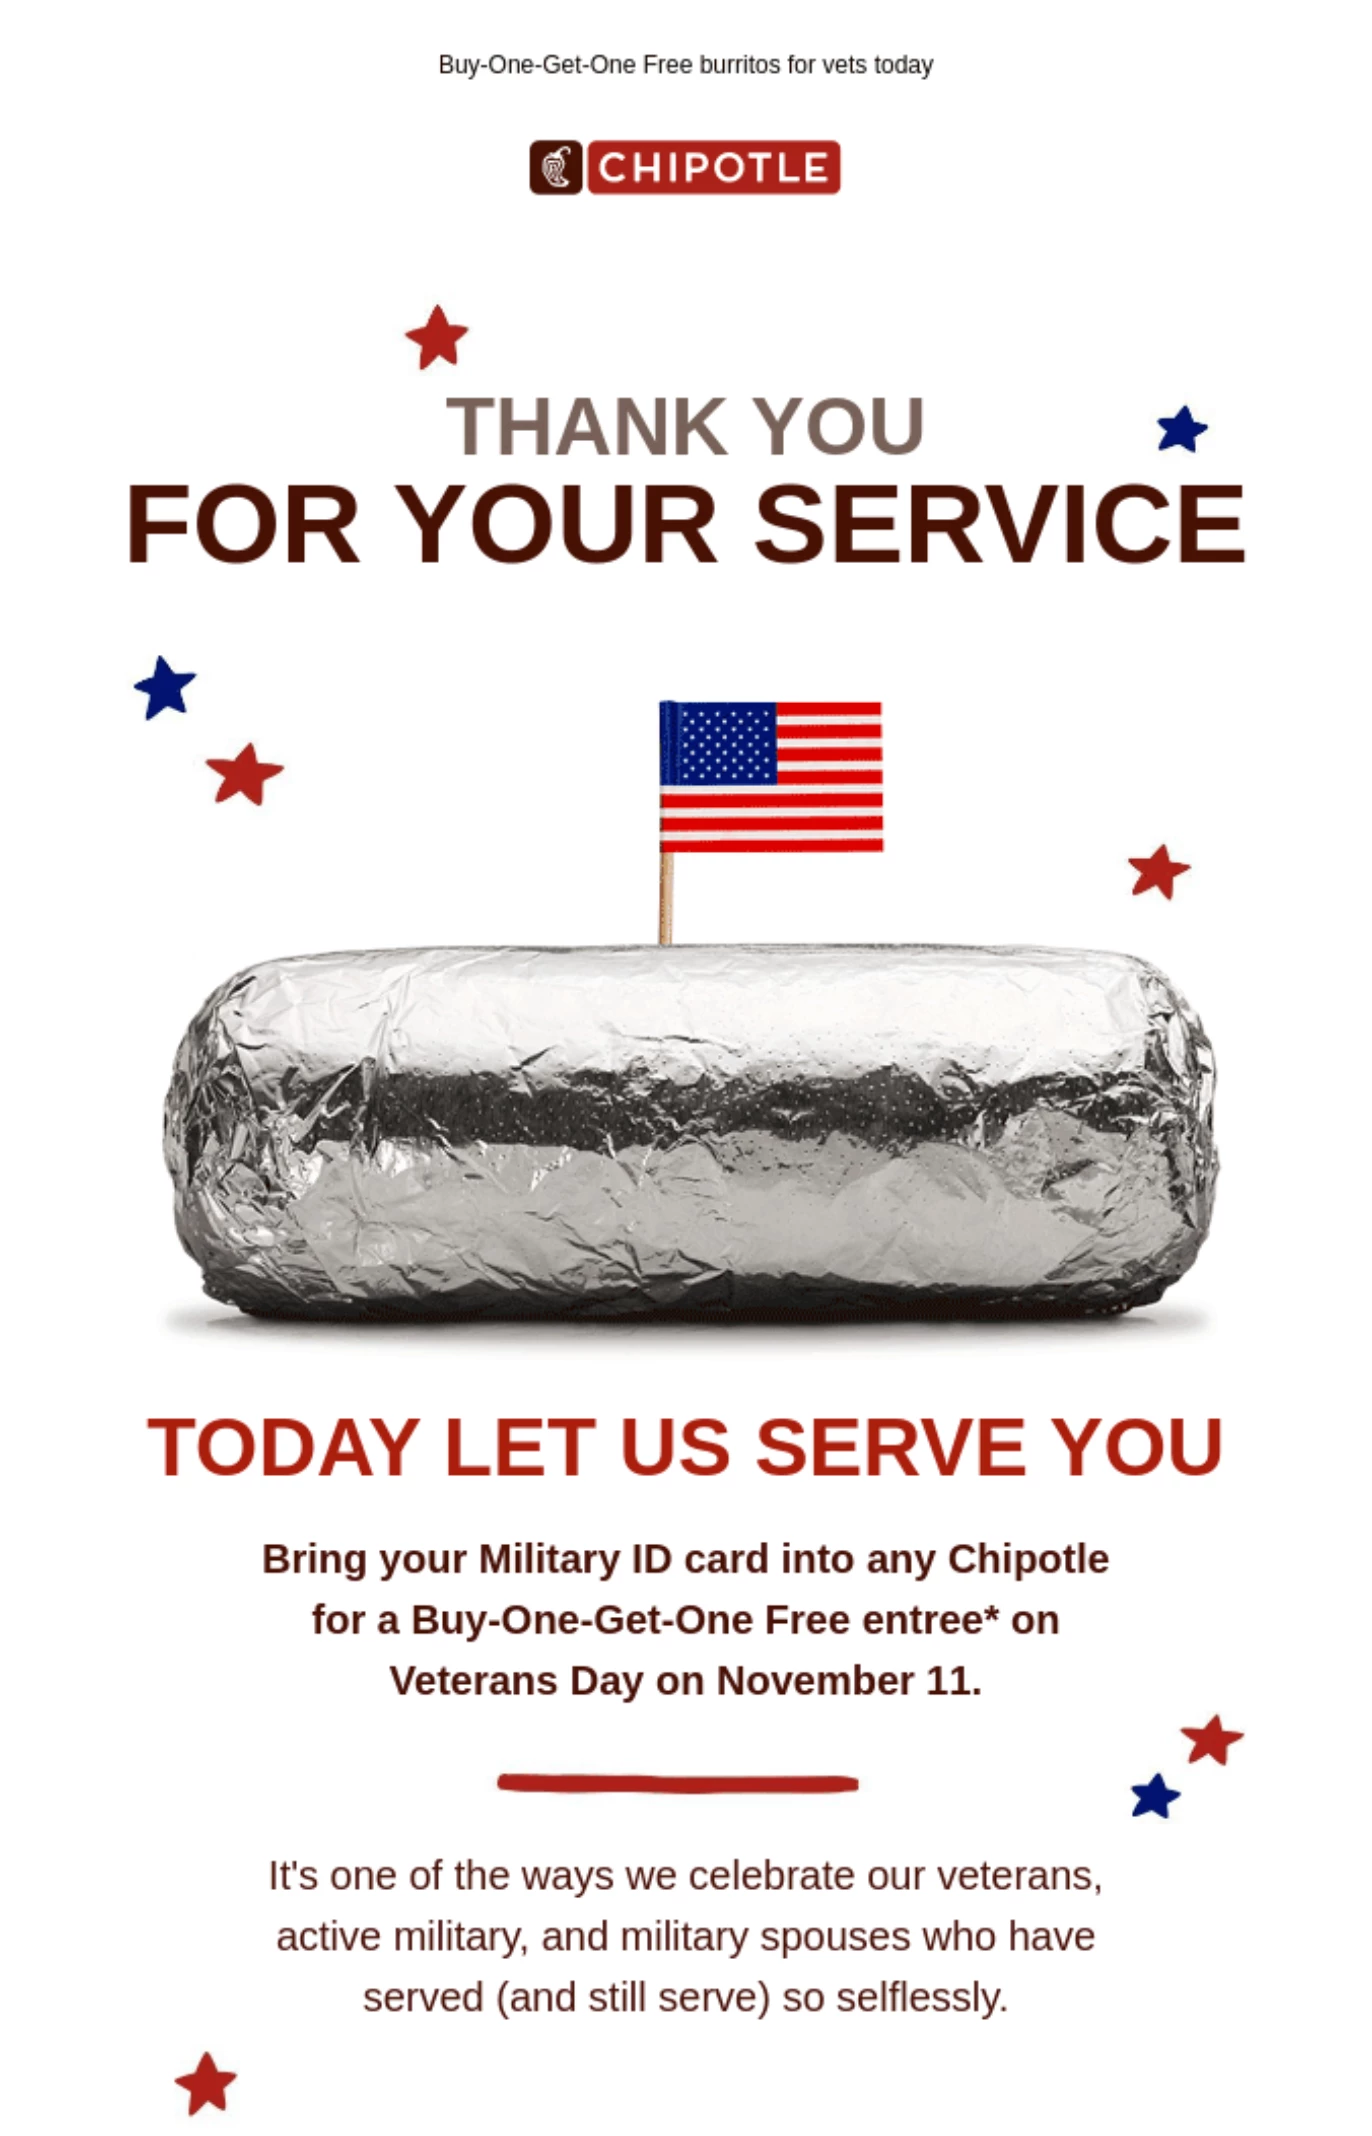 Veterans Day Newsletter example from Chipotle 